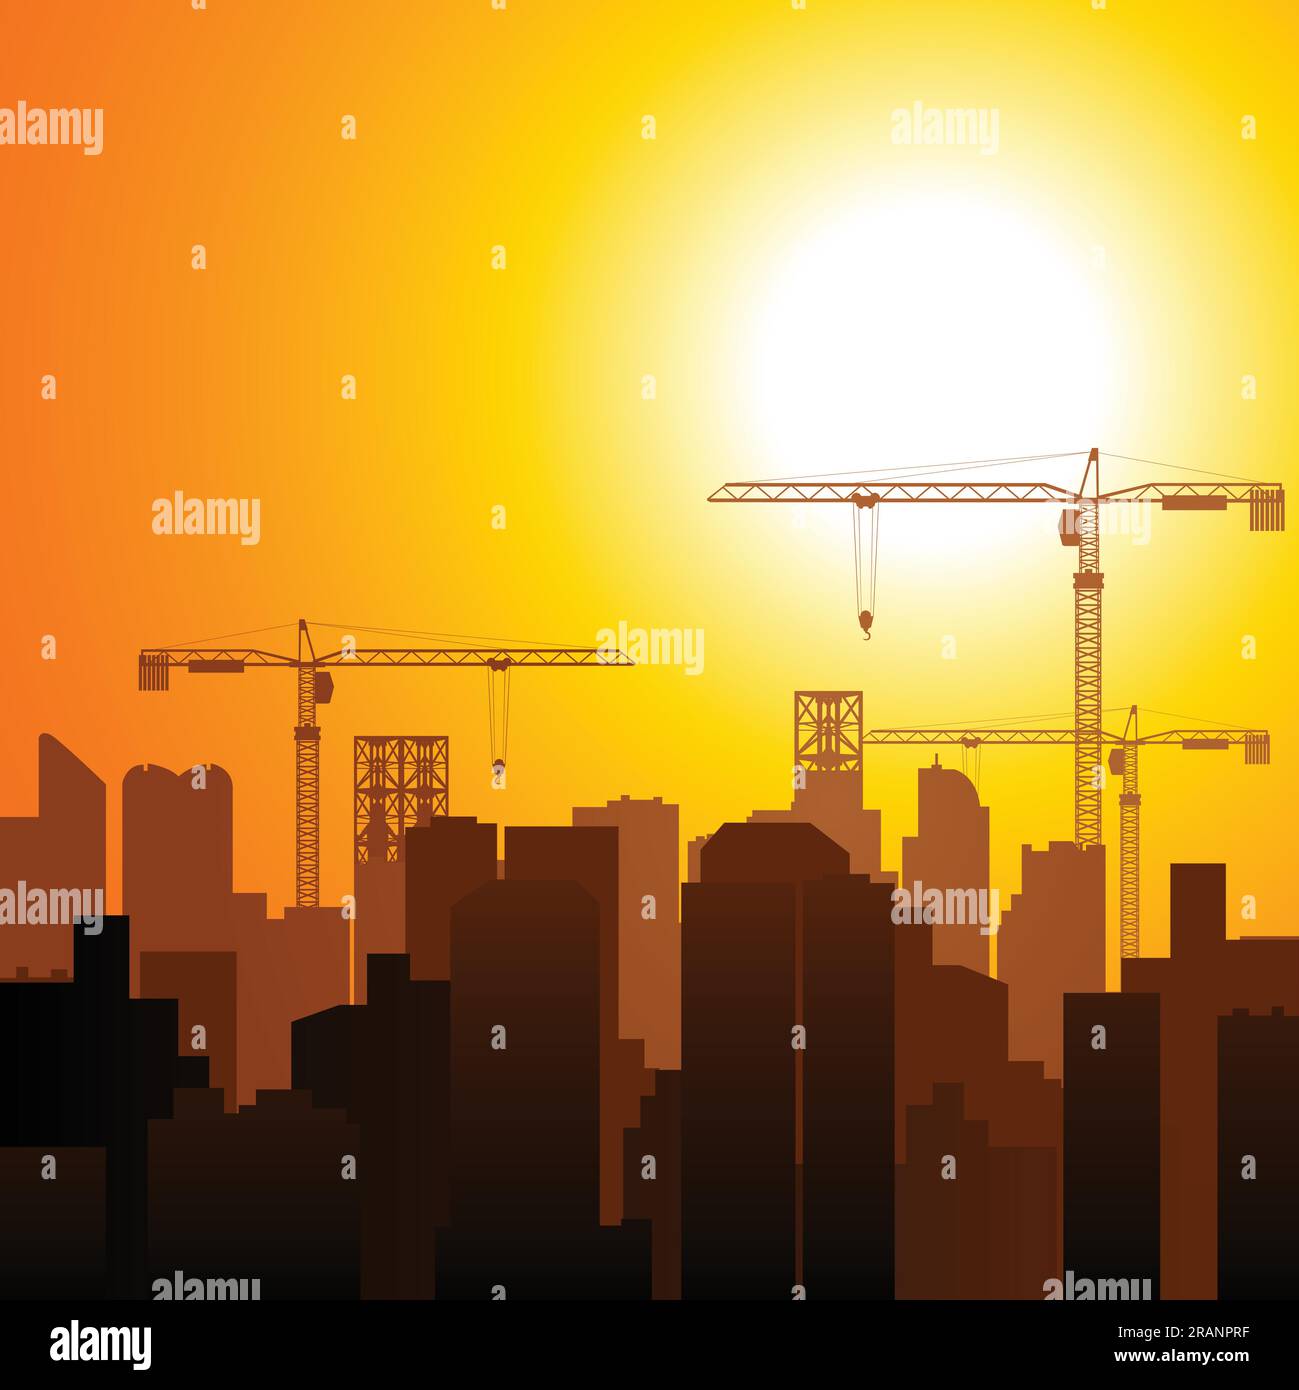 Graphic illustration of construction cranes and buildings, development, developing, growth, theme Stock Vector